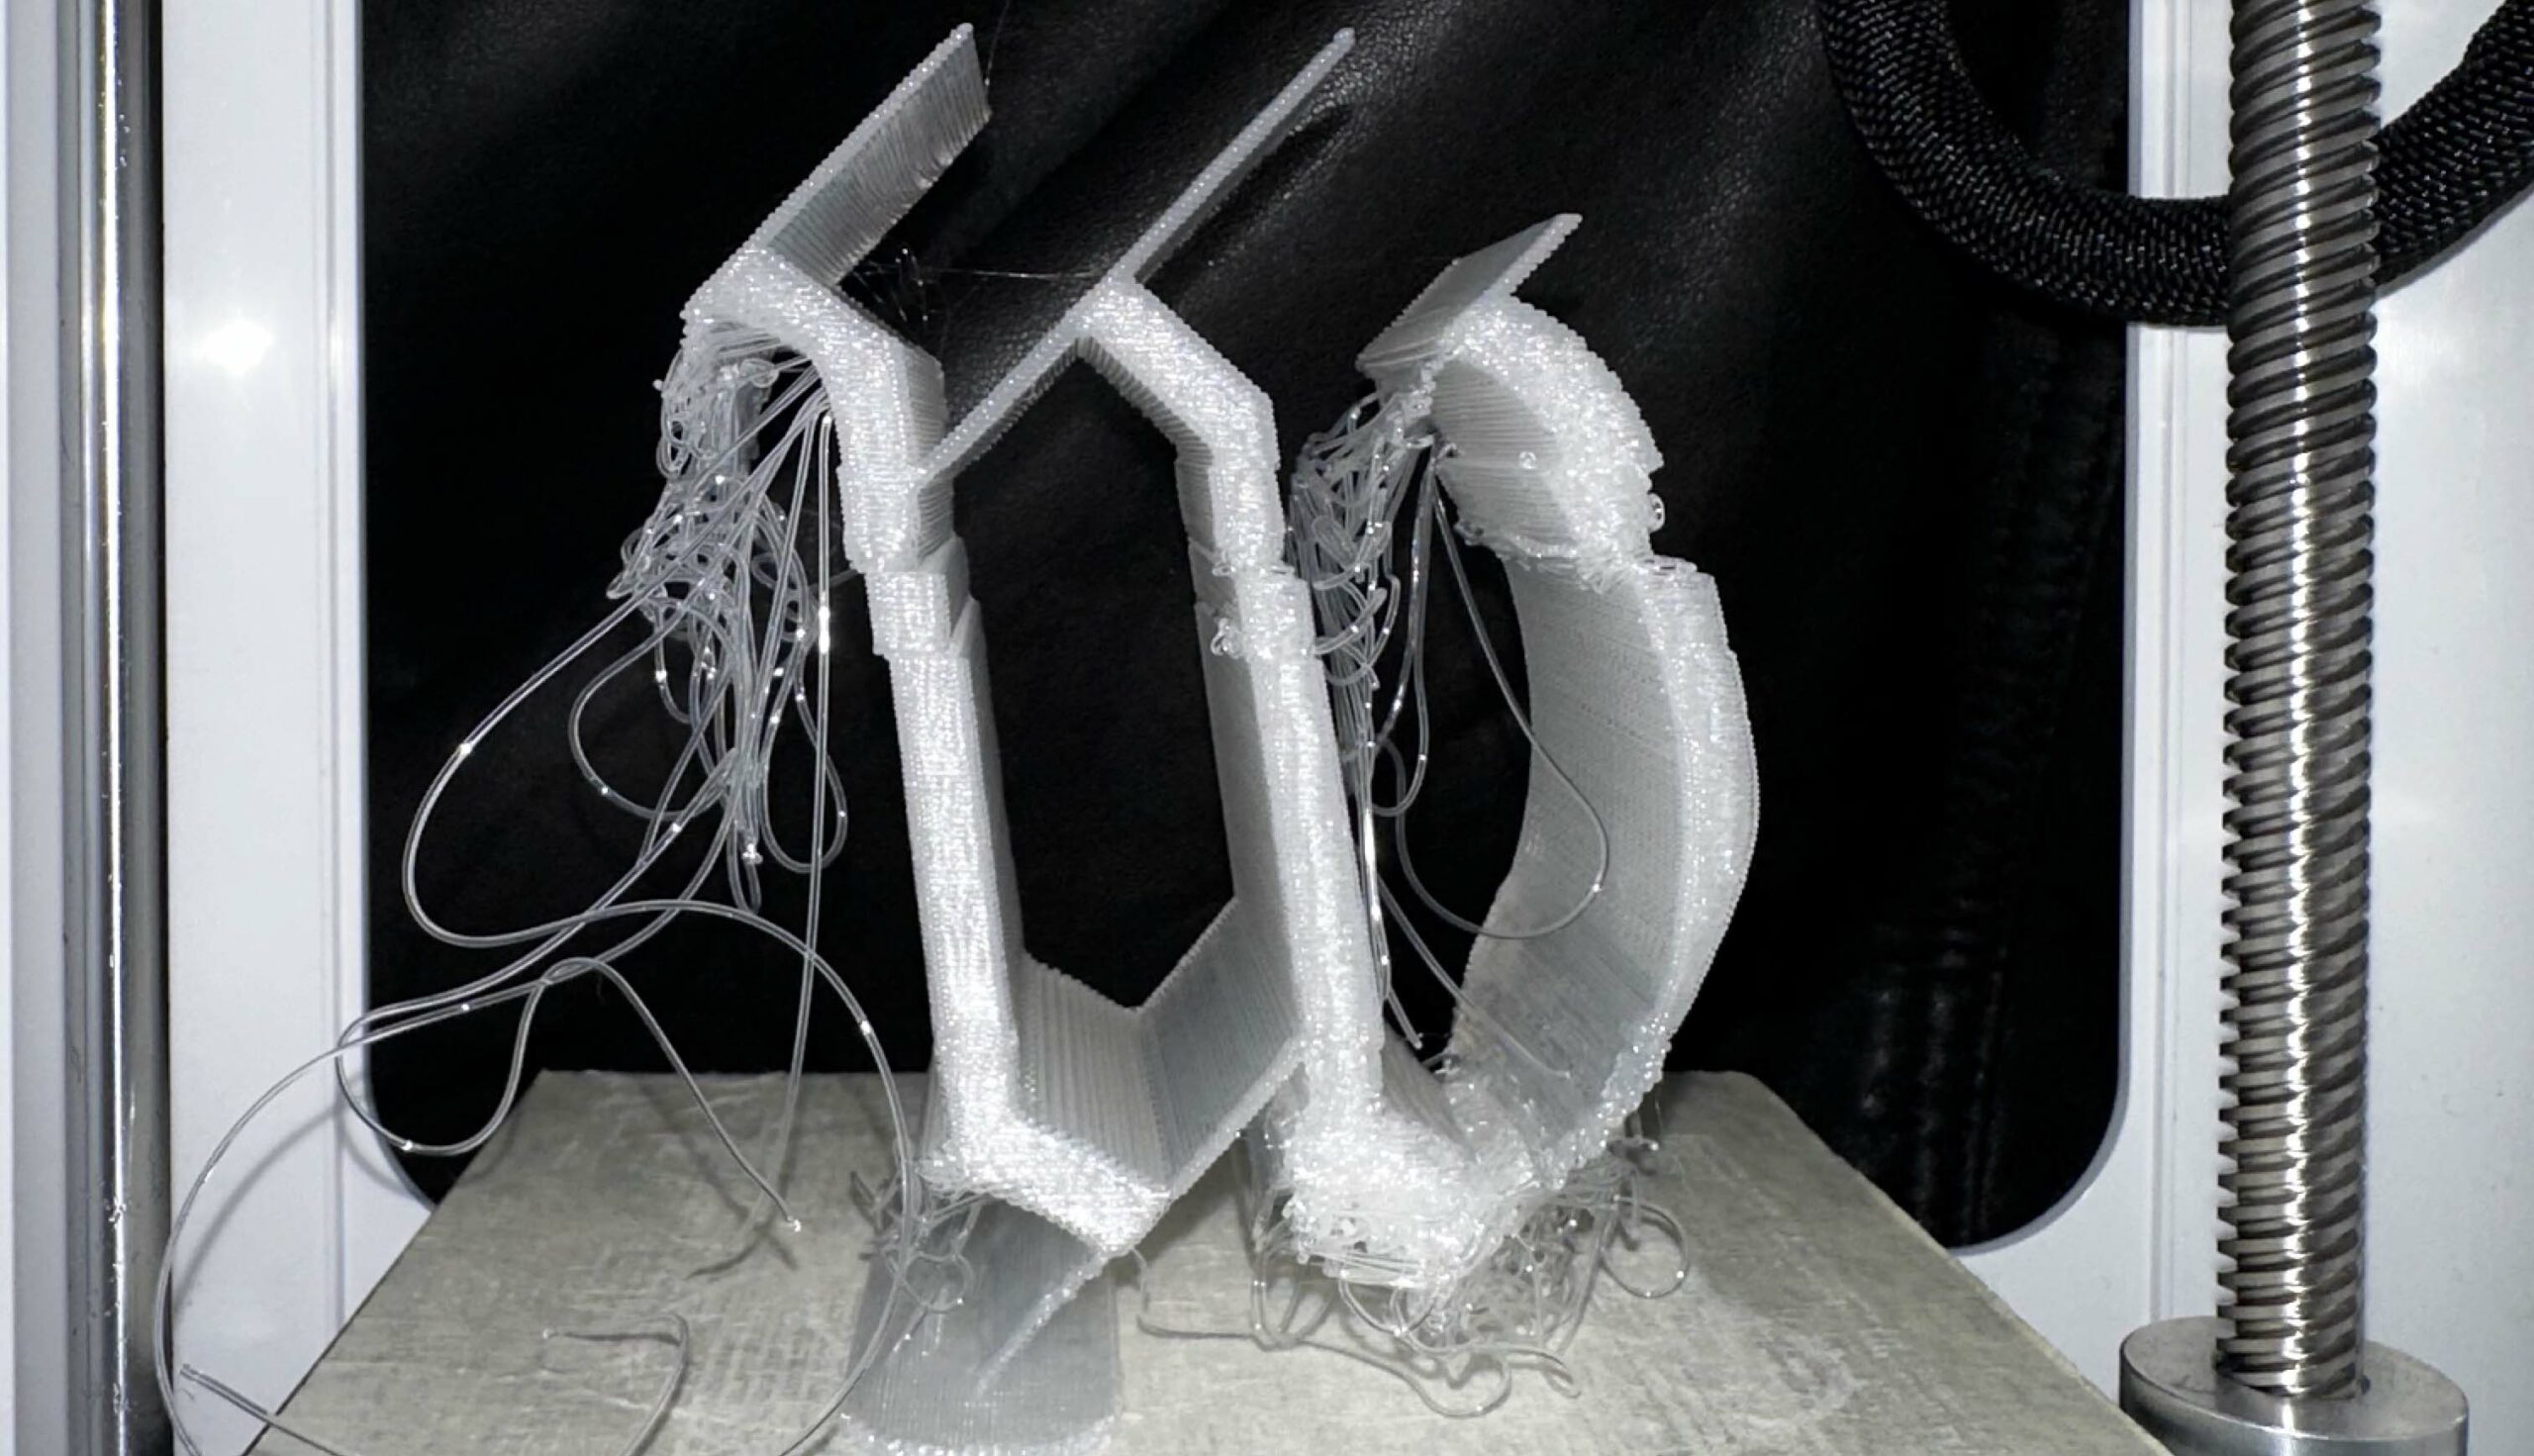 The first letter of the American Preamble, ‘W’, as it finished on the 3D printer.